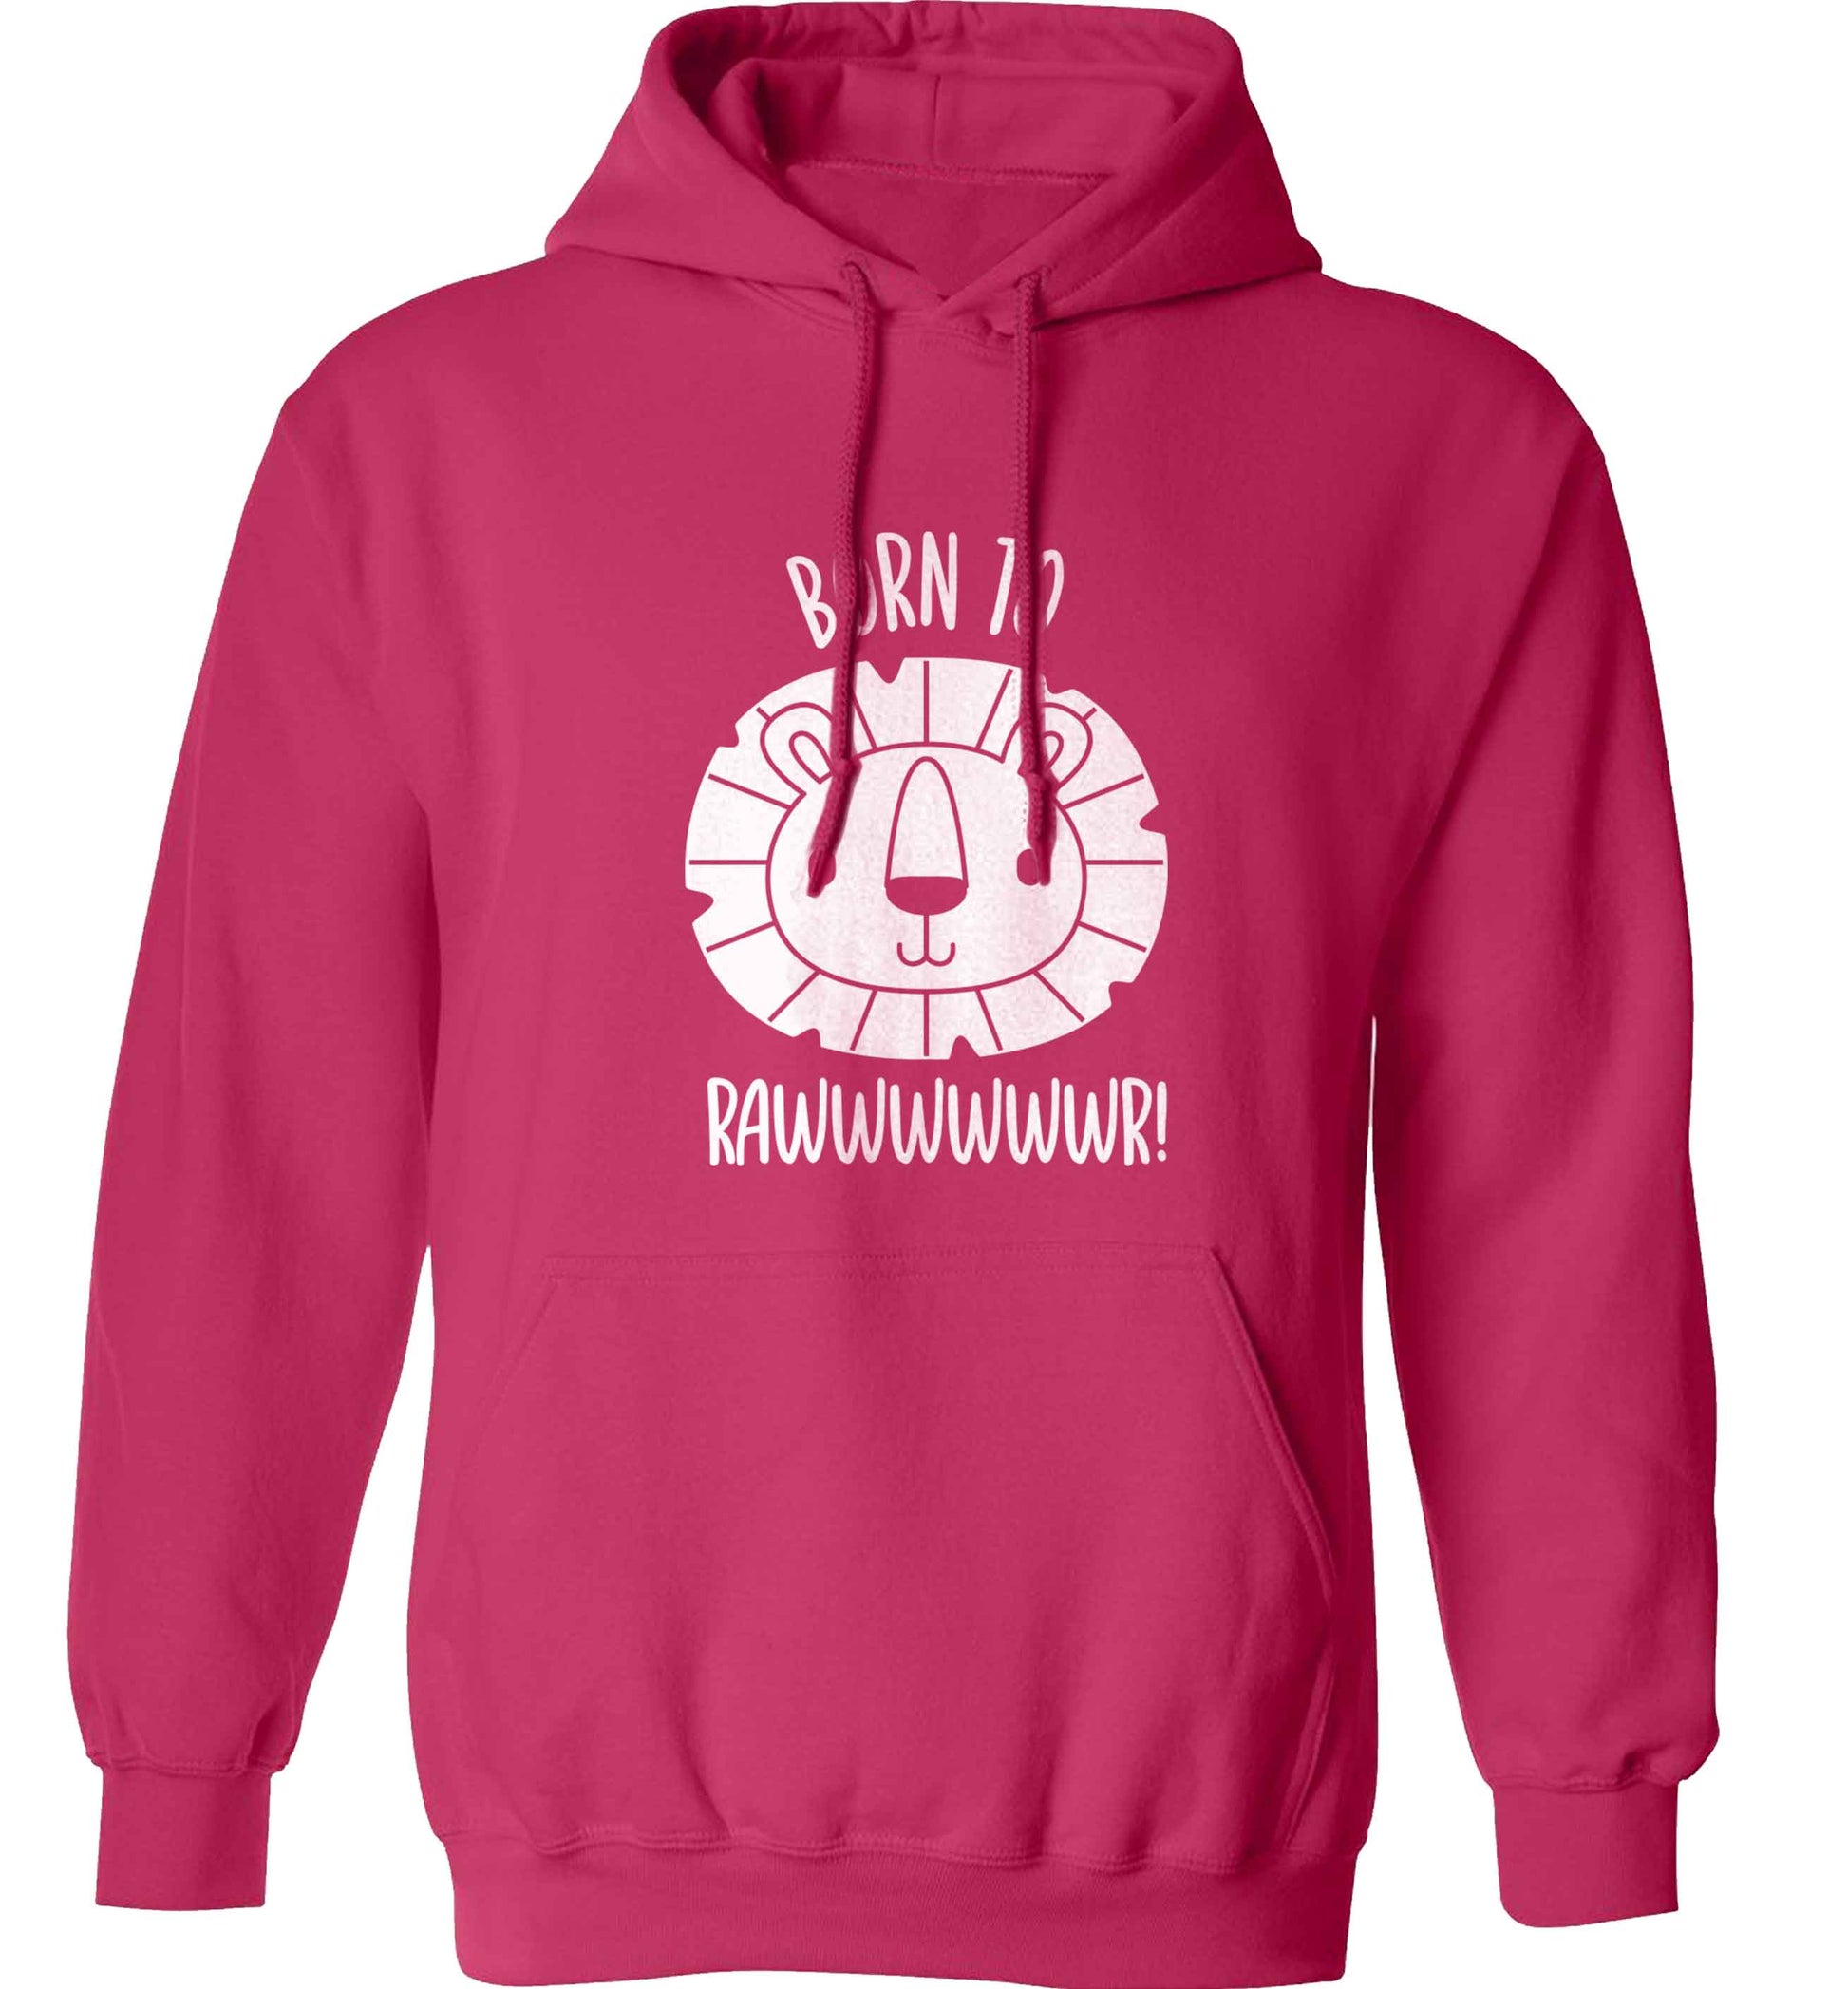 Born to rawr adults unisex pink hoodie 2XL